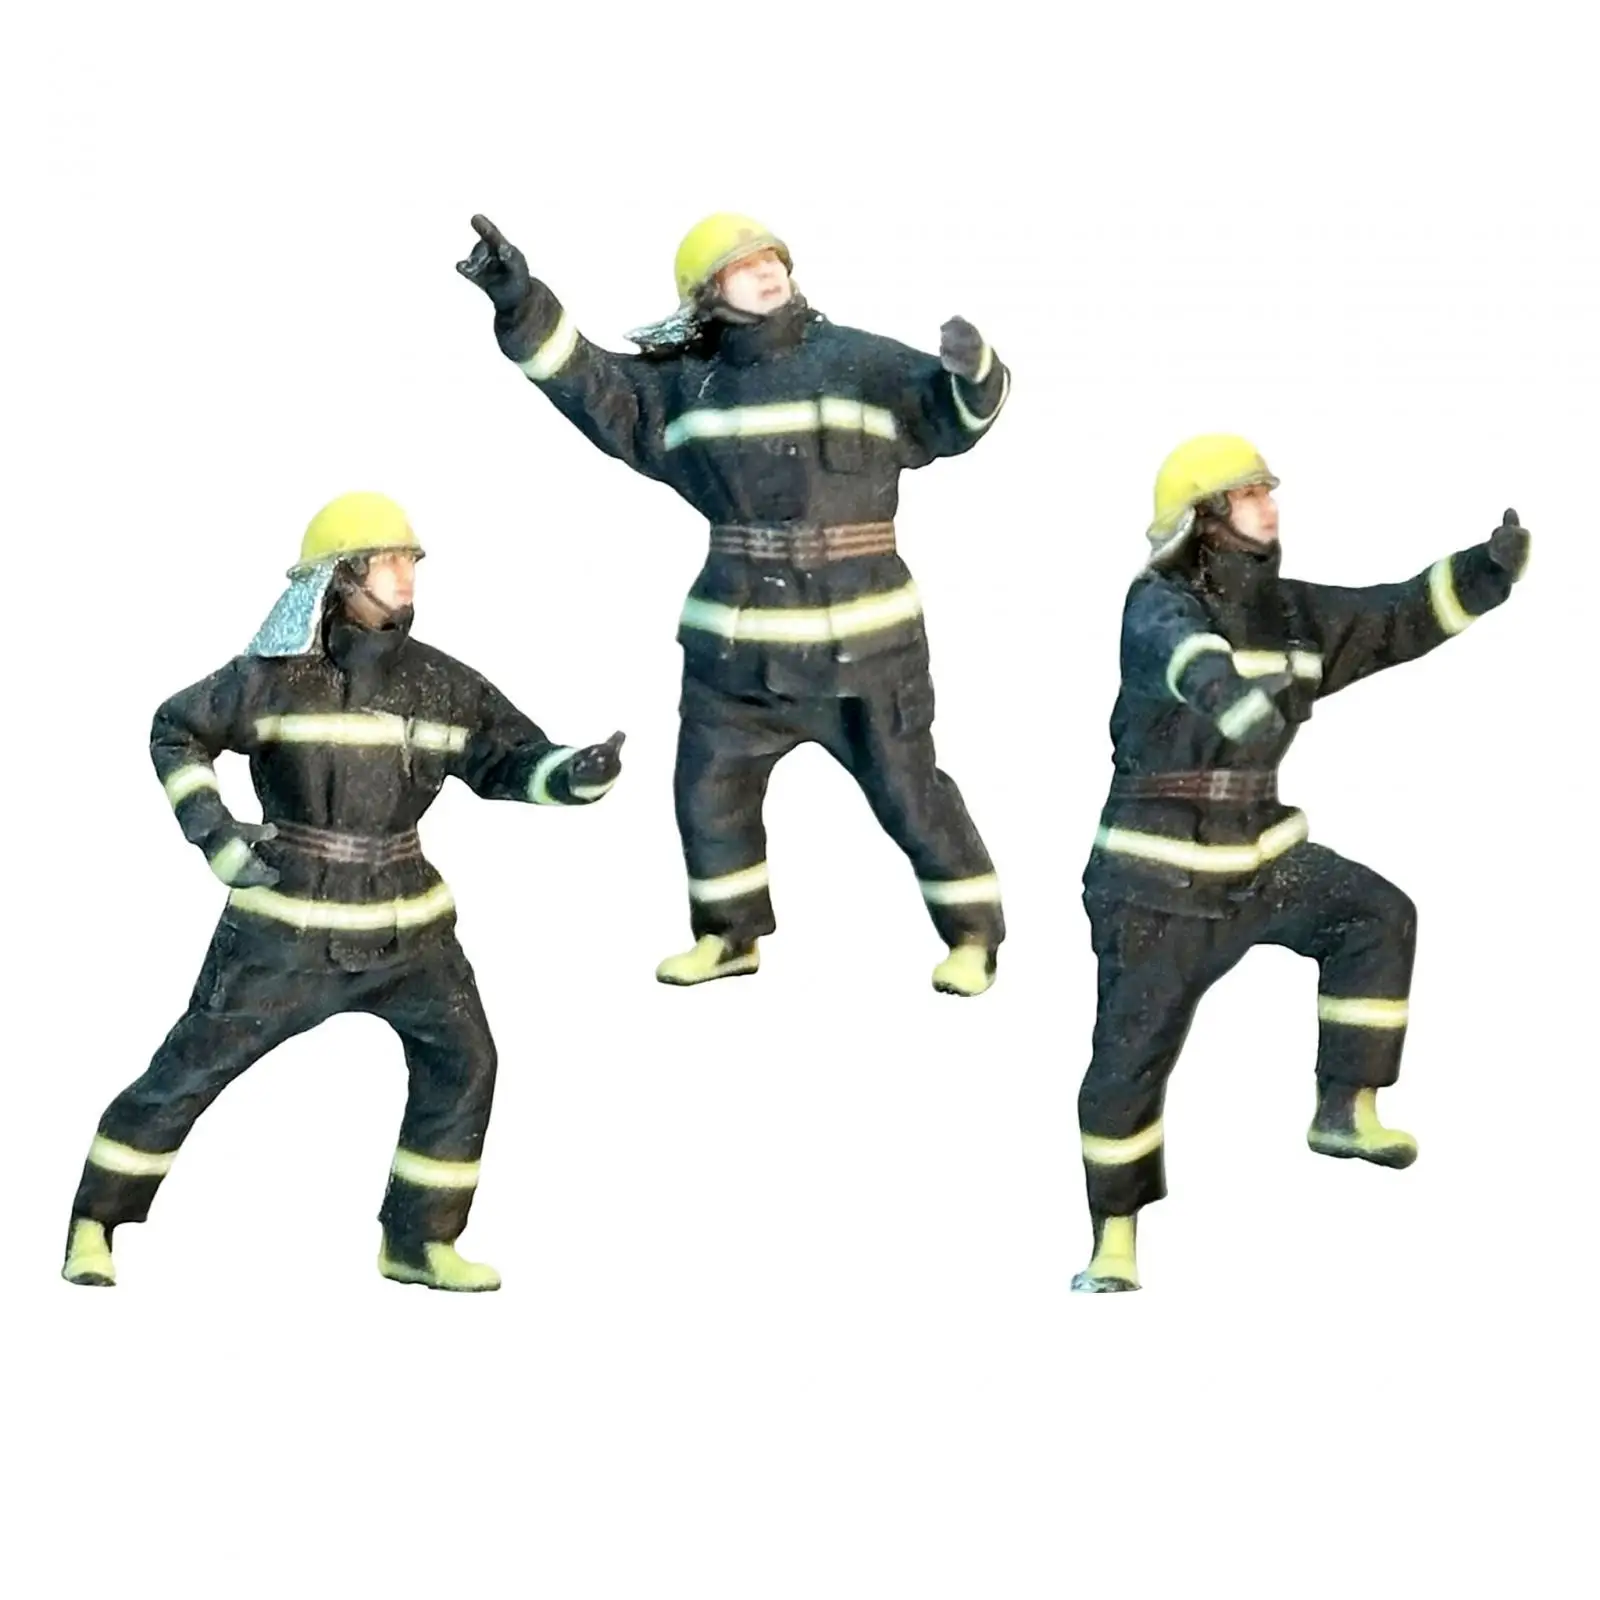 3Pcs Miniature Firefighter Figures Realistic Model Trains People Figures for Photography Props DIY Scene Dollhouse Decoration